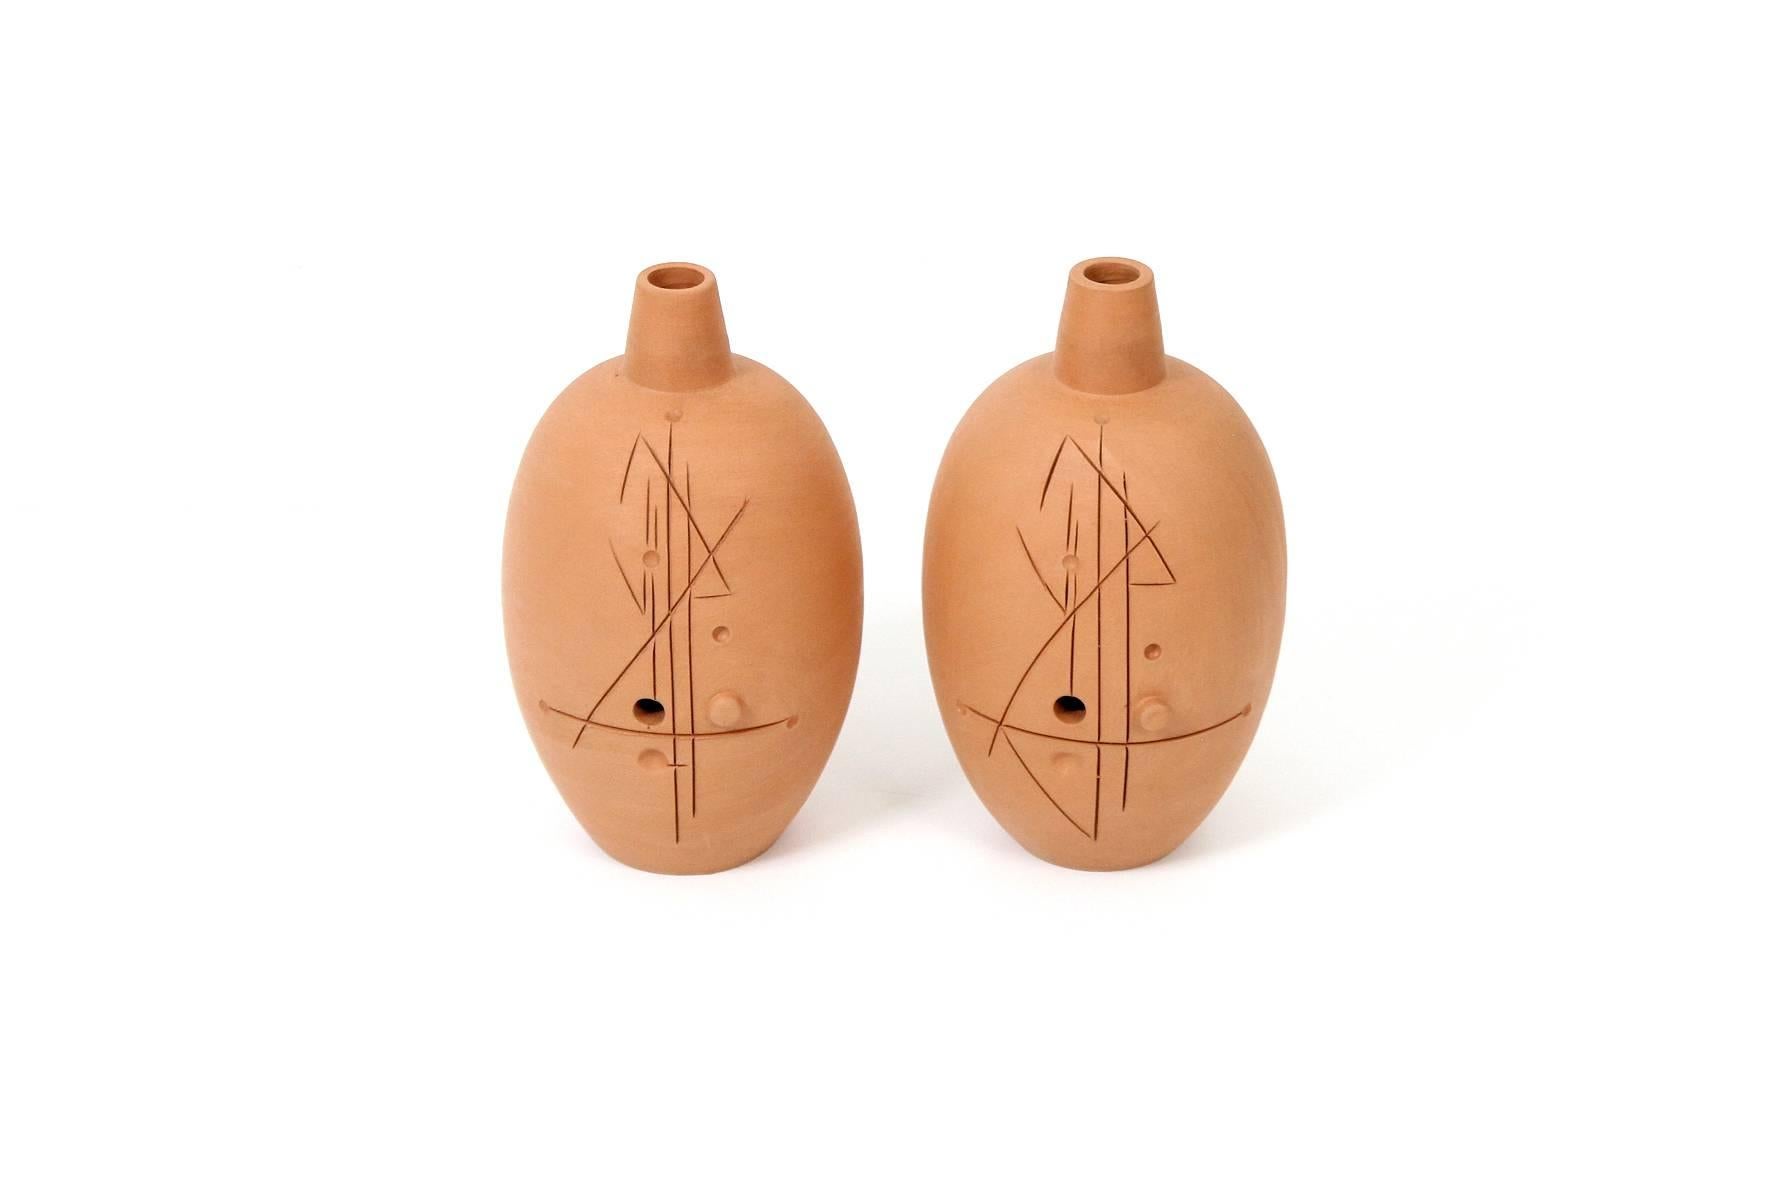 Abstractly carved vases by Raymor. Design attributed to Bitossi. Marked to the underneath of one vase 